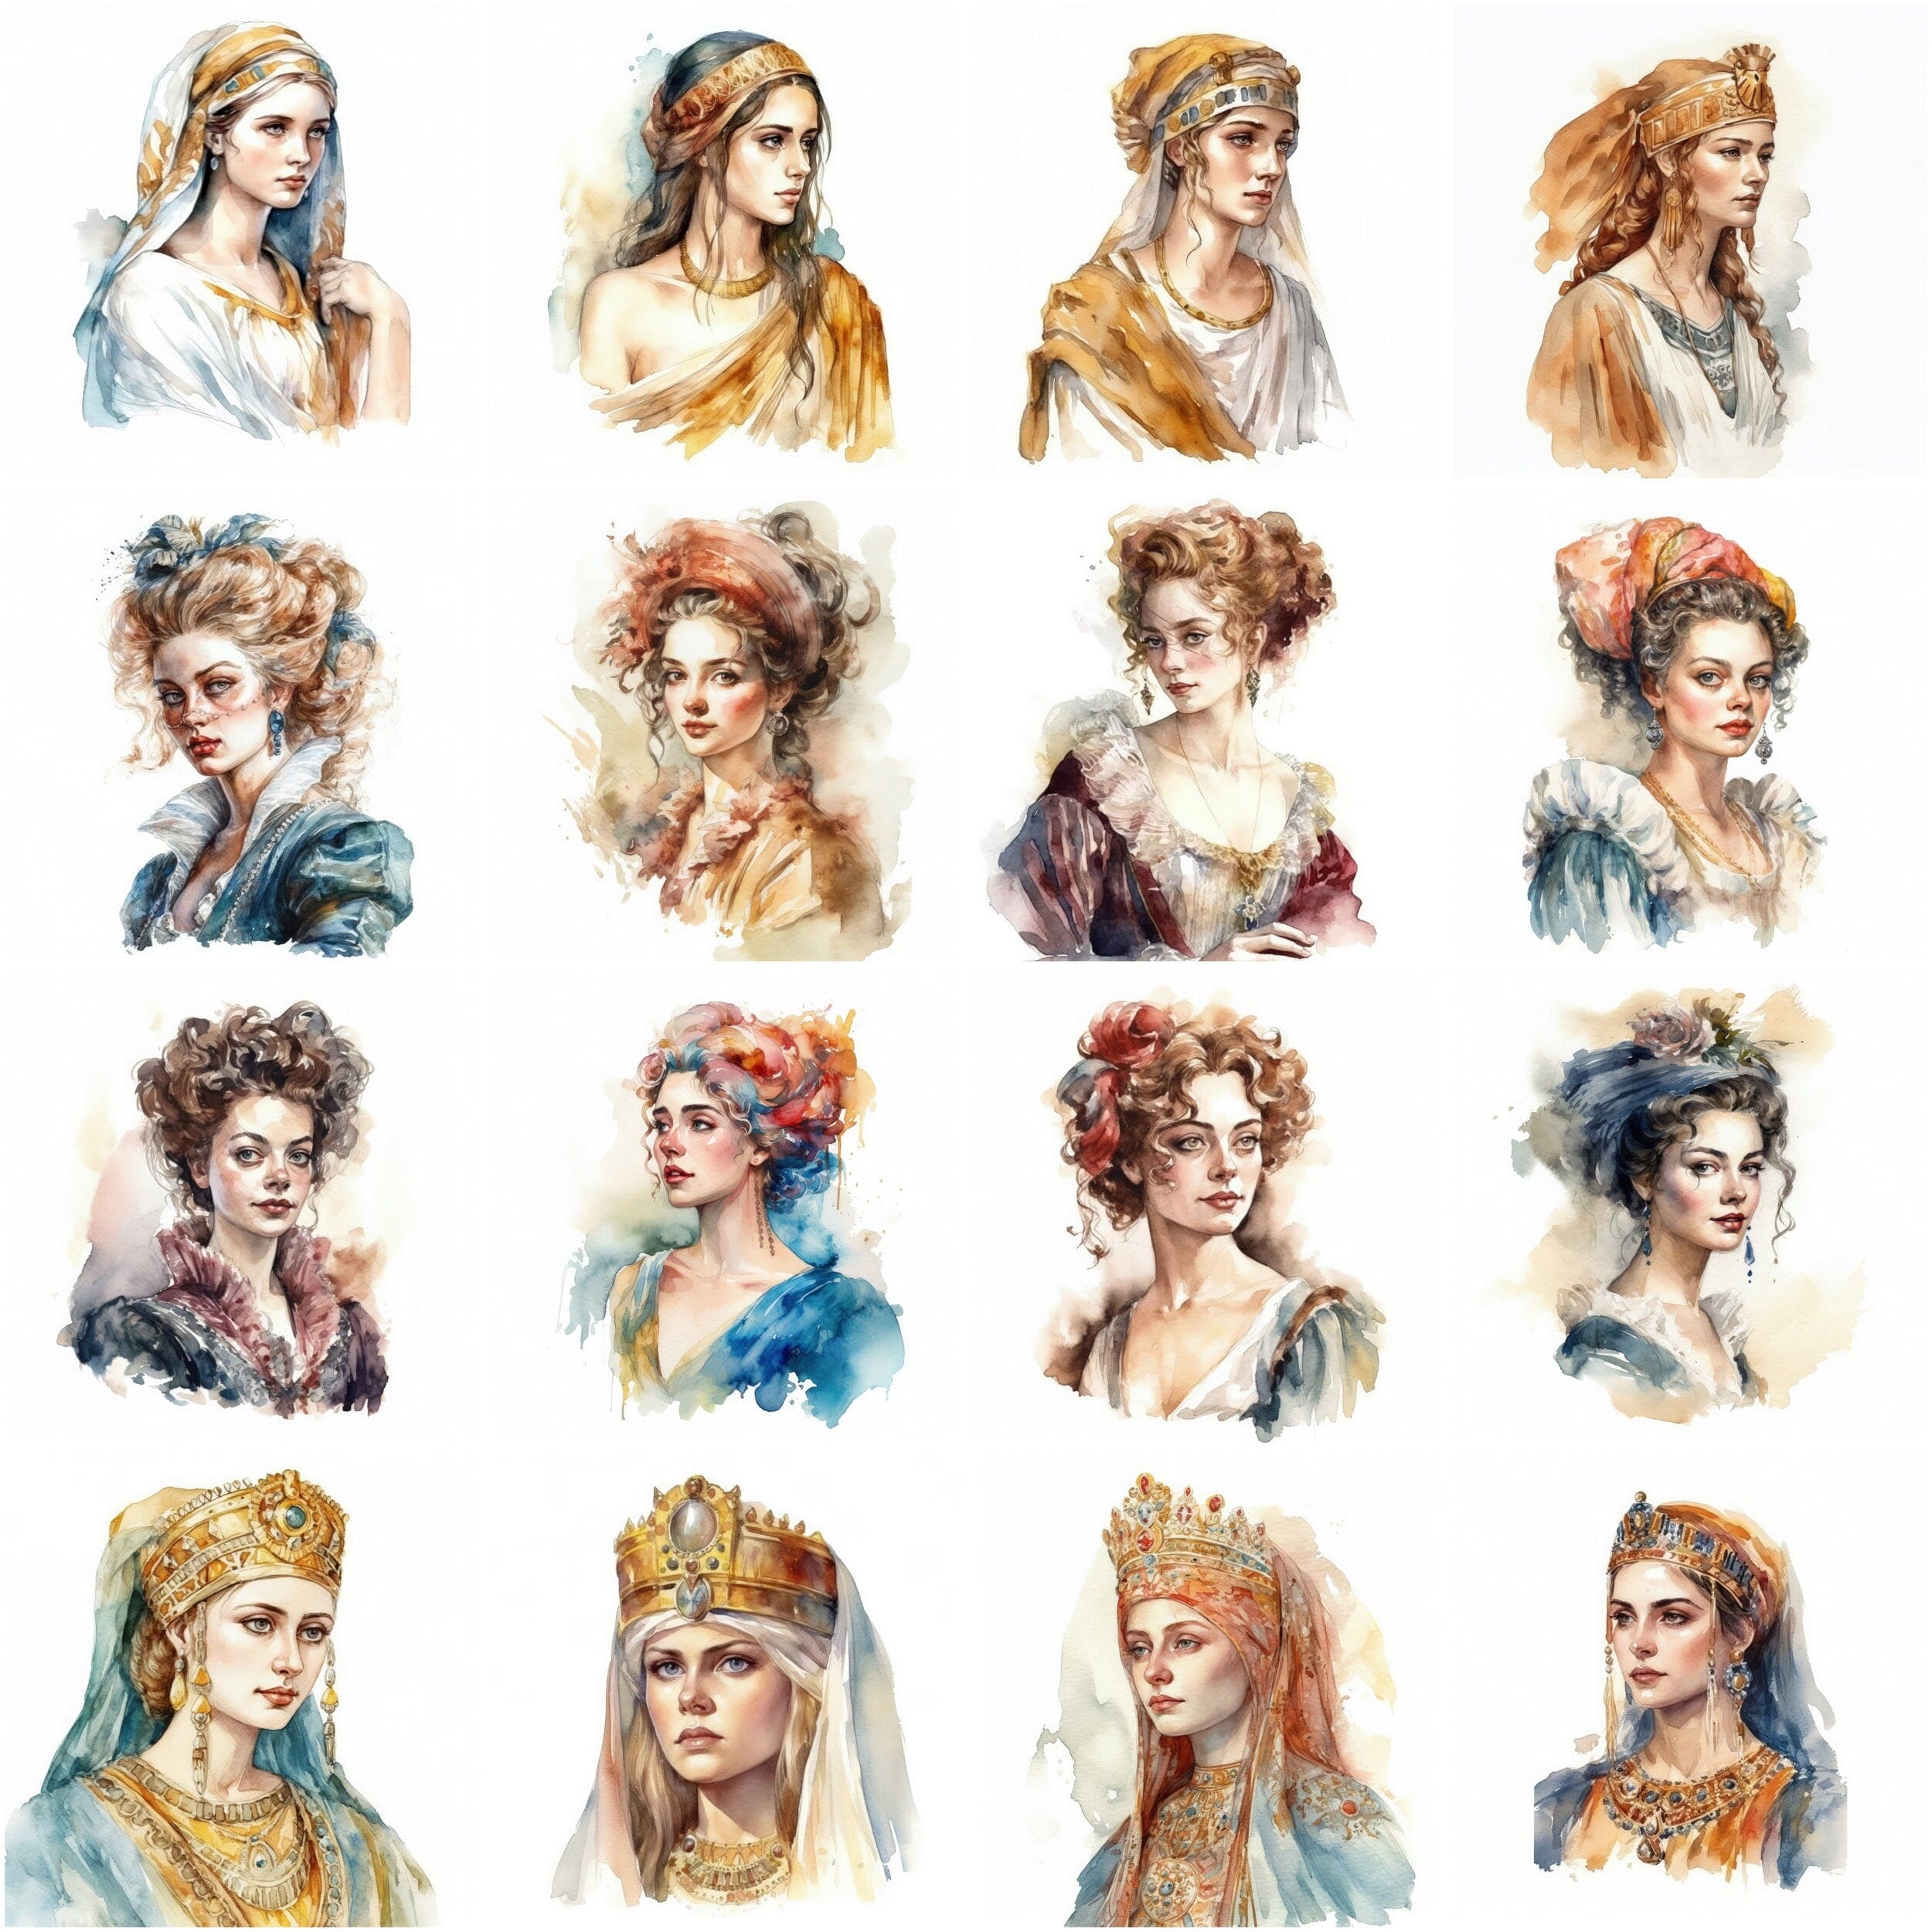 Women Through the Decades: Watercolor Portraits from the 1920s to Today - Celebrating Women From Ancient Times to the Present Day Digital Download Sumobundle